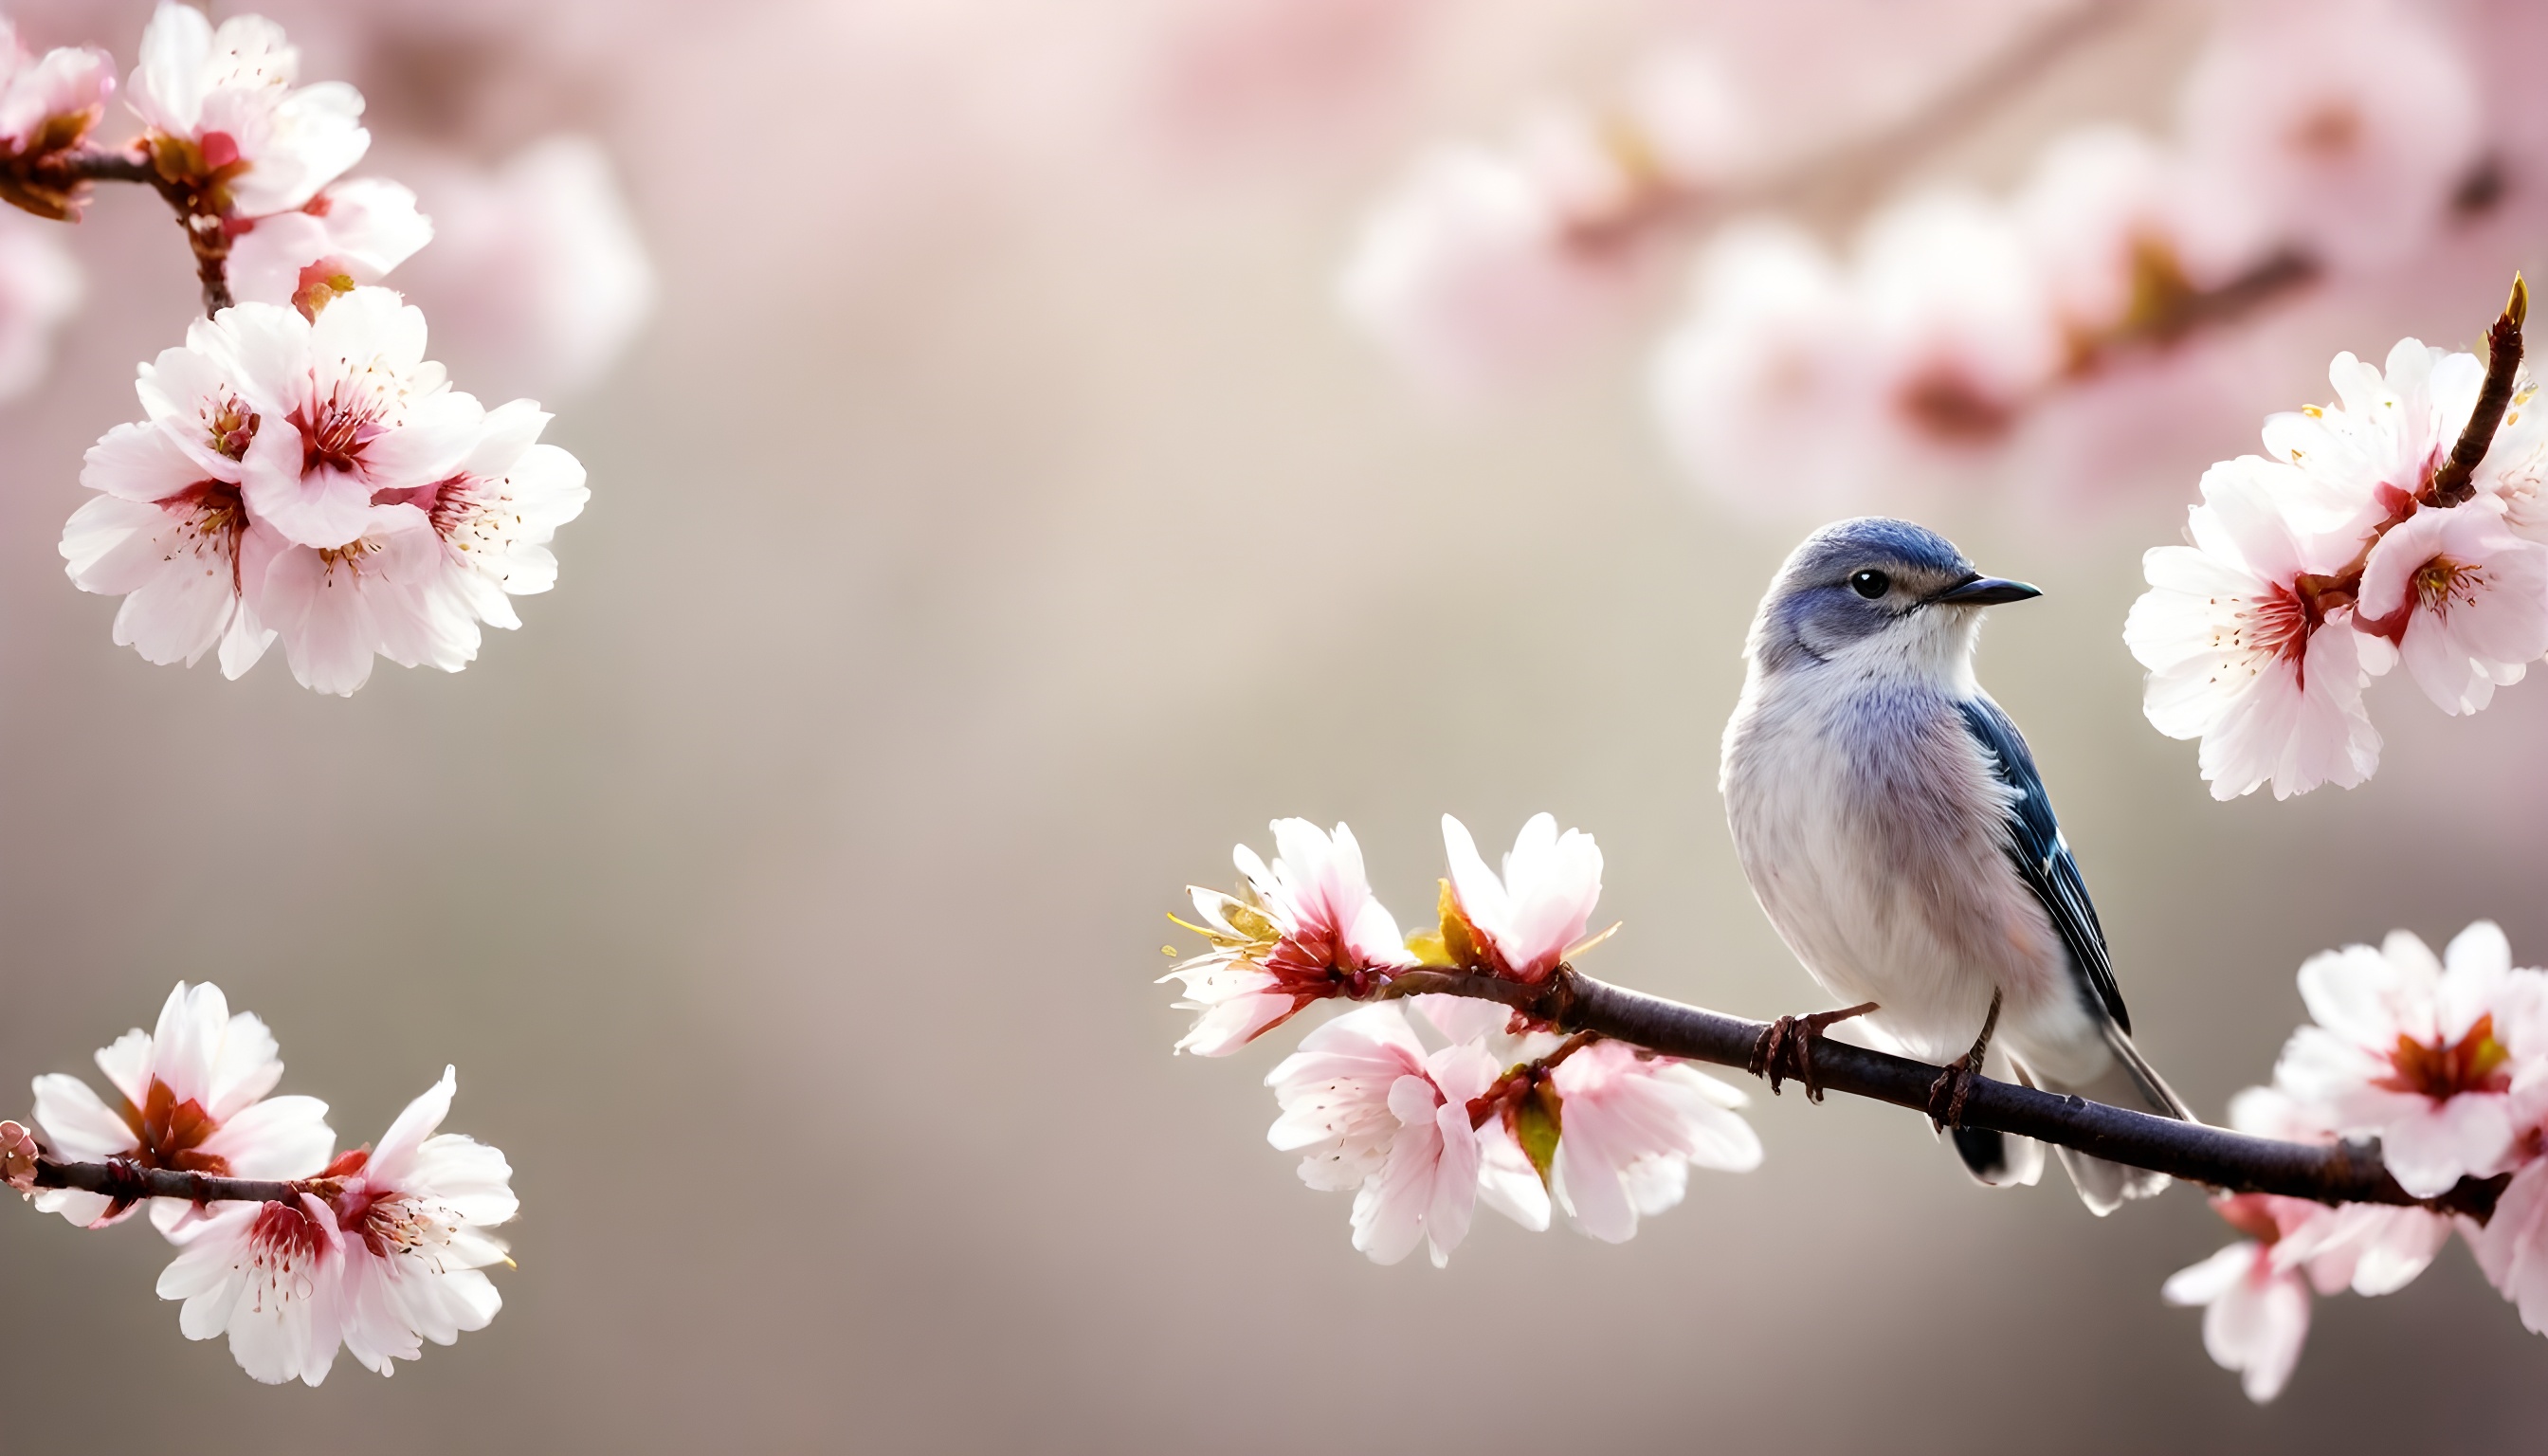 A-delicate-bird-perched-on-a-blooming-cherry-blossom-branch--its-feathers-shimmering-in-the-so...jpg